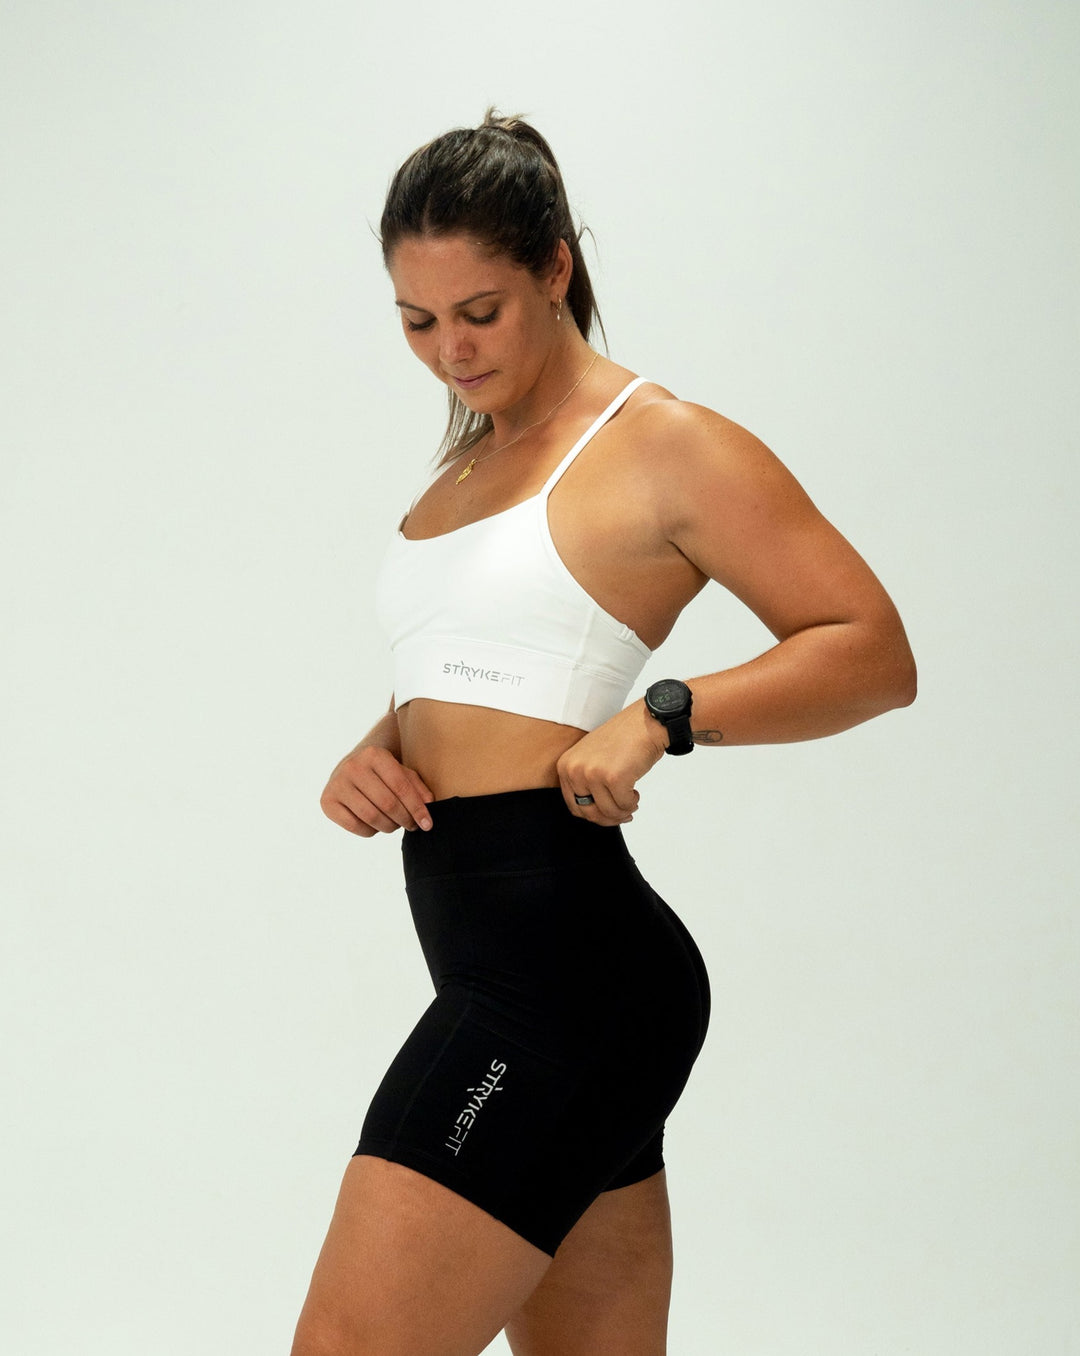 The PACE 7" RUN SHORT is the ultimate staple piece for runners of all levels. These shorts are made from lightweight fabric and are designed for comfort, support, and exceptional mobility. With the added convenience of leg pockets, you can carry your phone effortlessly without any distractions.